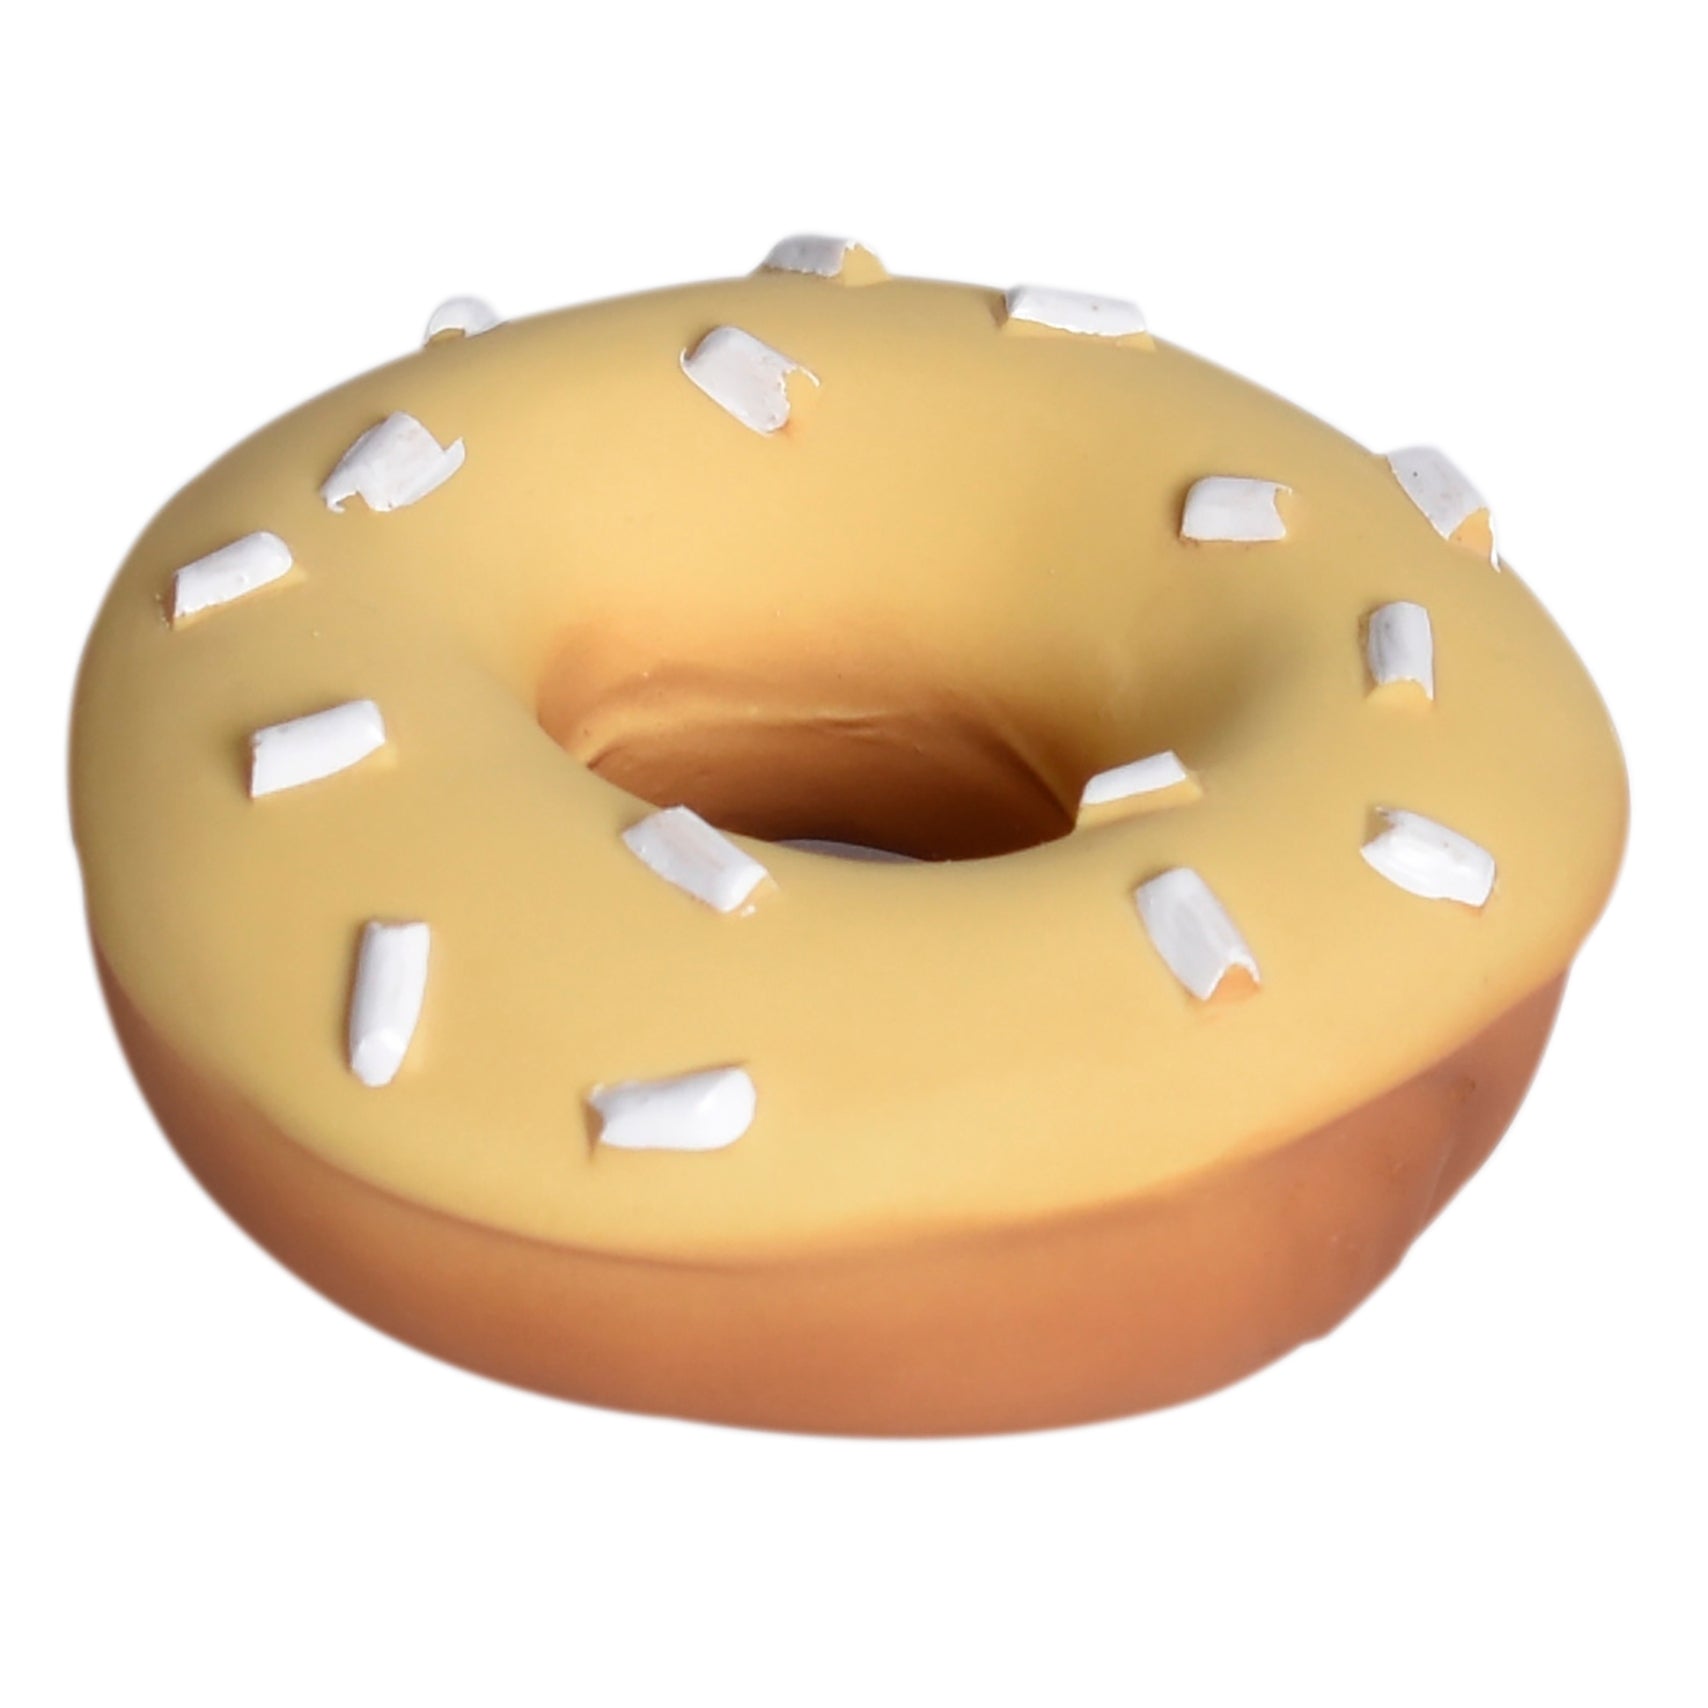 Donut Natural Rubber Teether, Rattle & Pretend Play - Twinkle Twinkle Little One